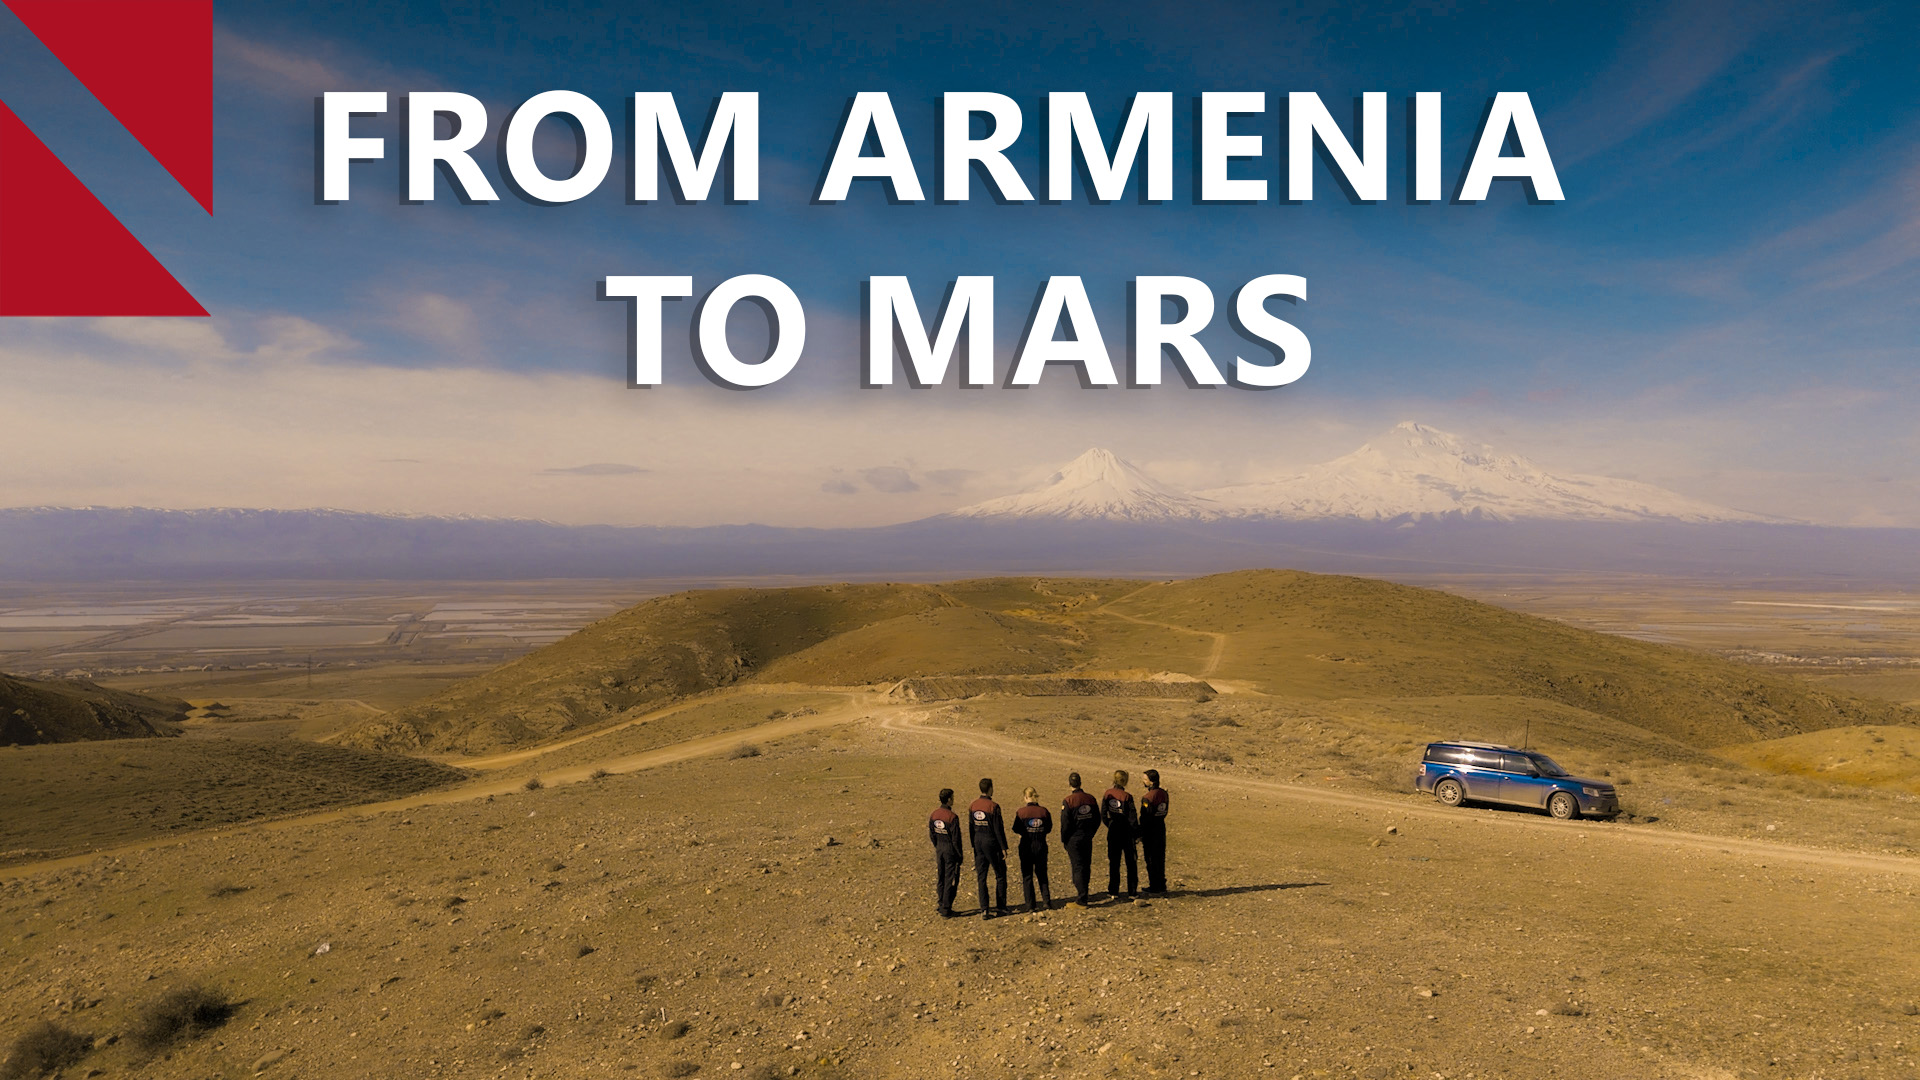 Simulated Mars mission brings Armenia one step closer to space